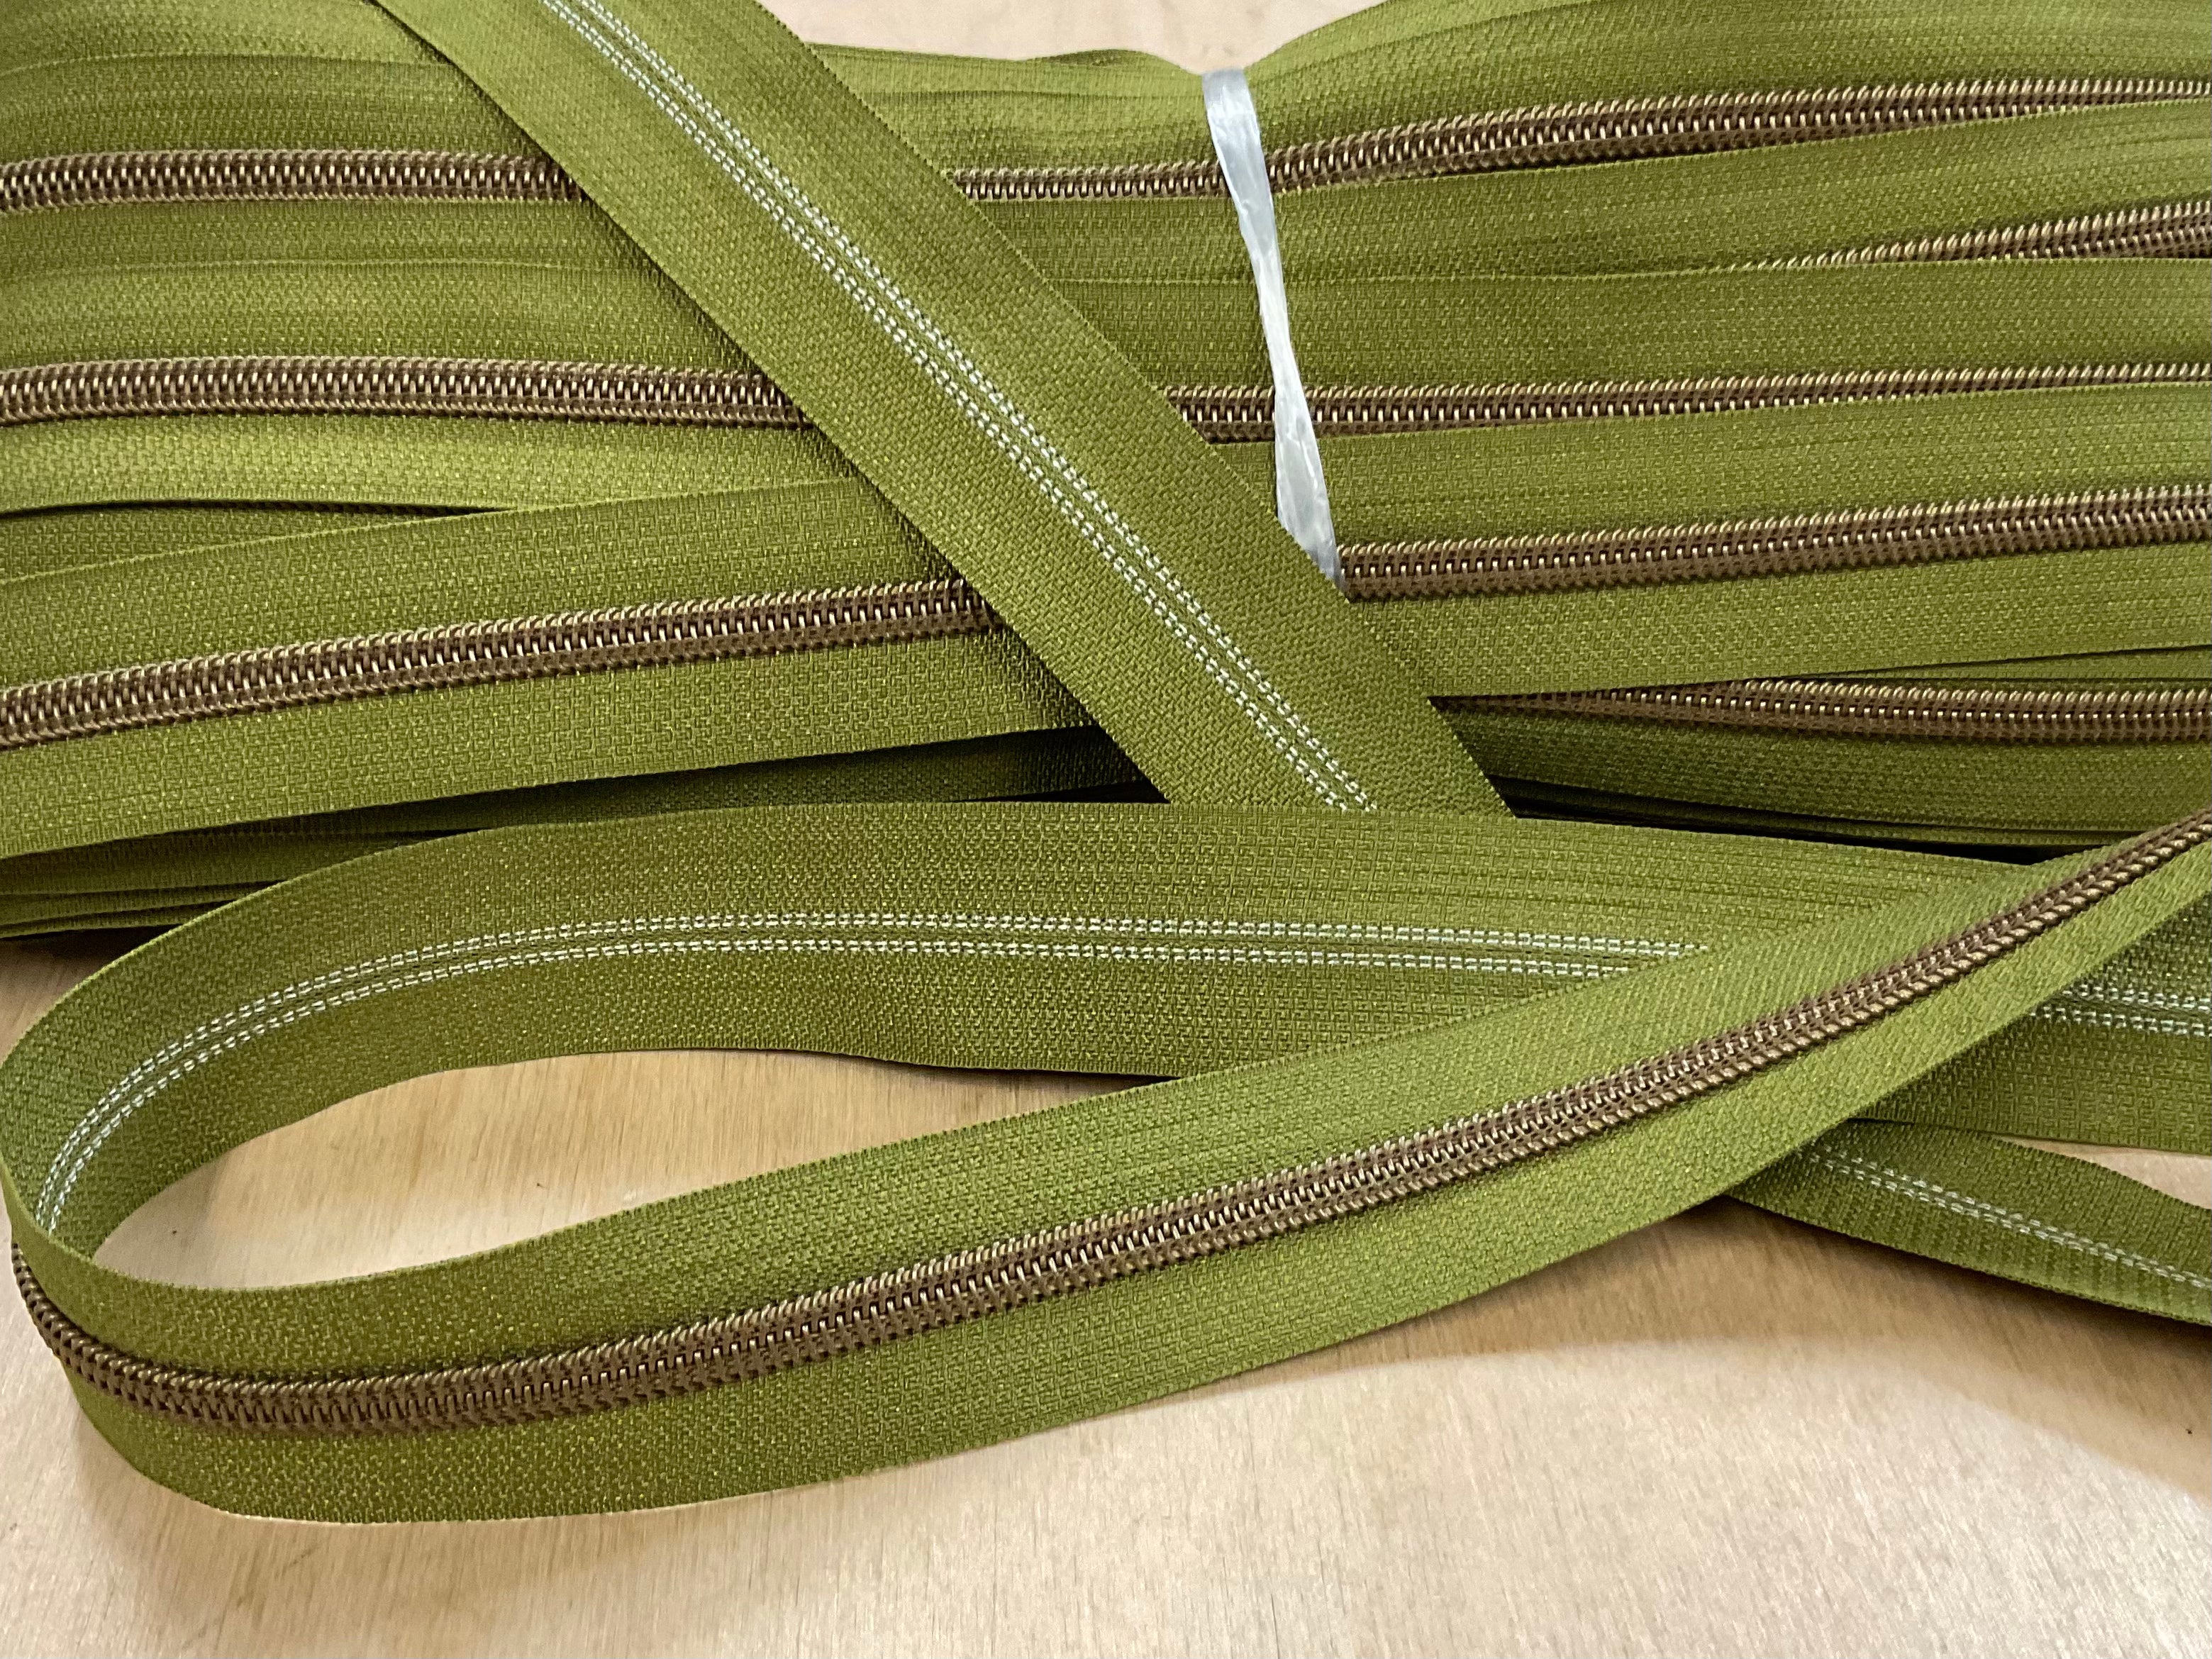 Olive with Brown Teeth Continuous Zipper Tape